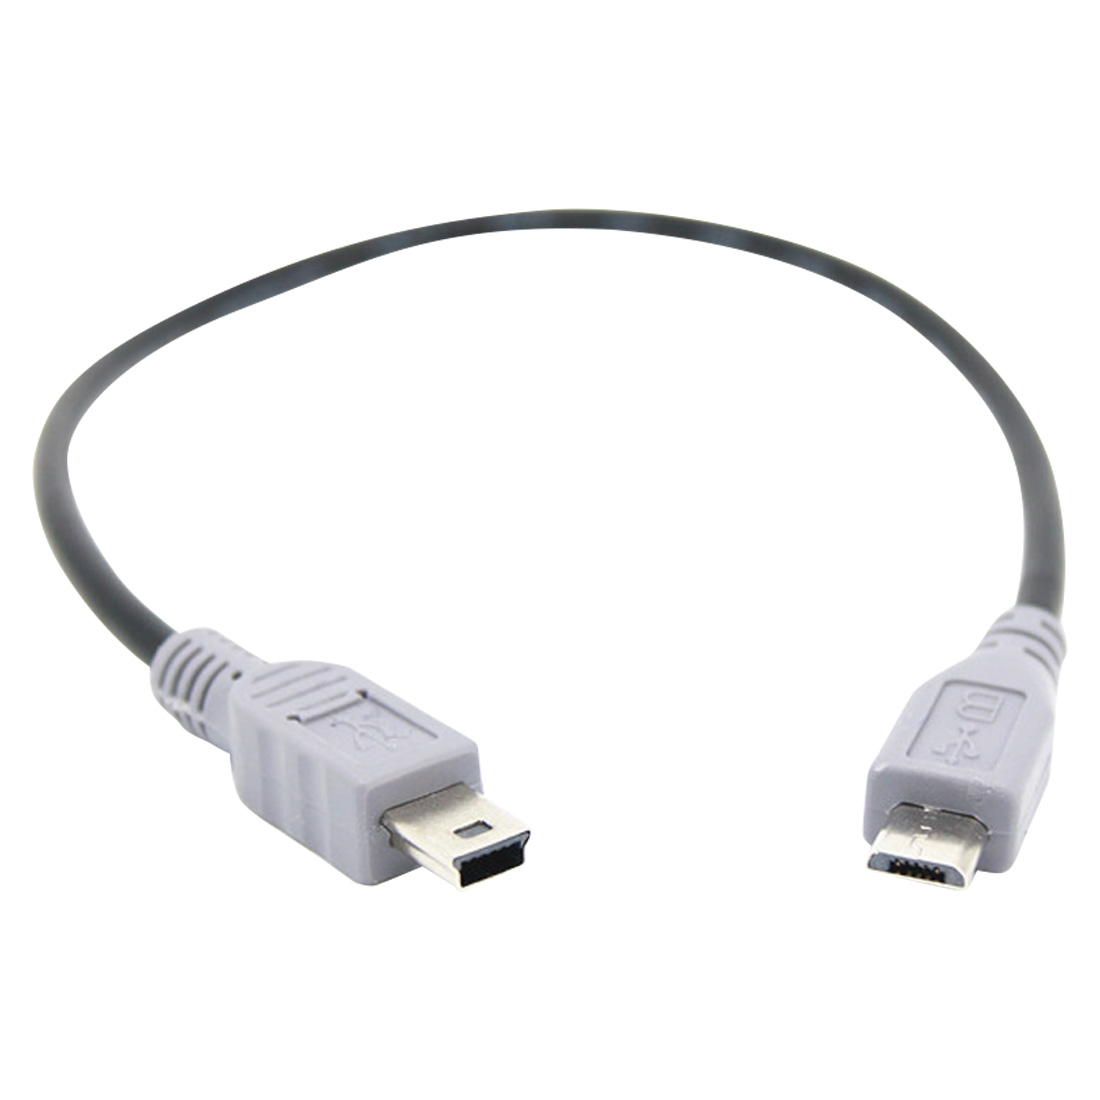 Generic 1pc USB 3.1 Type-C Male Plug to USB Mini Male Plug Charging Data OTG Connector Adapter Male to Male Cable 25cm/1m 